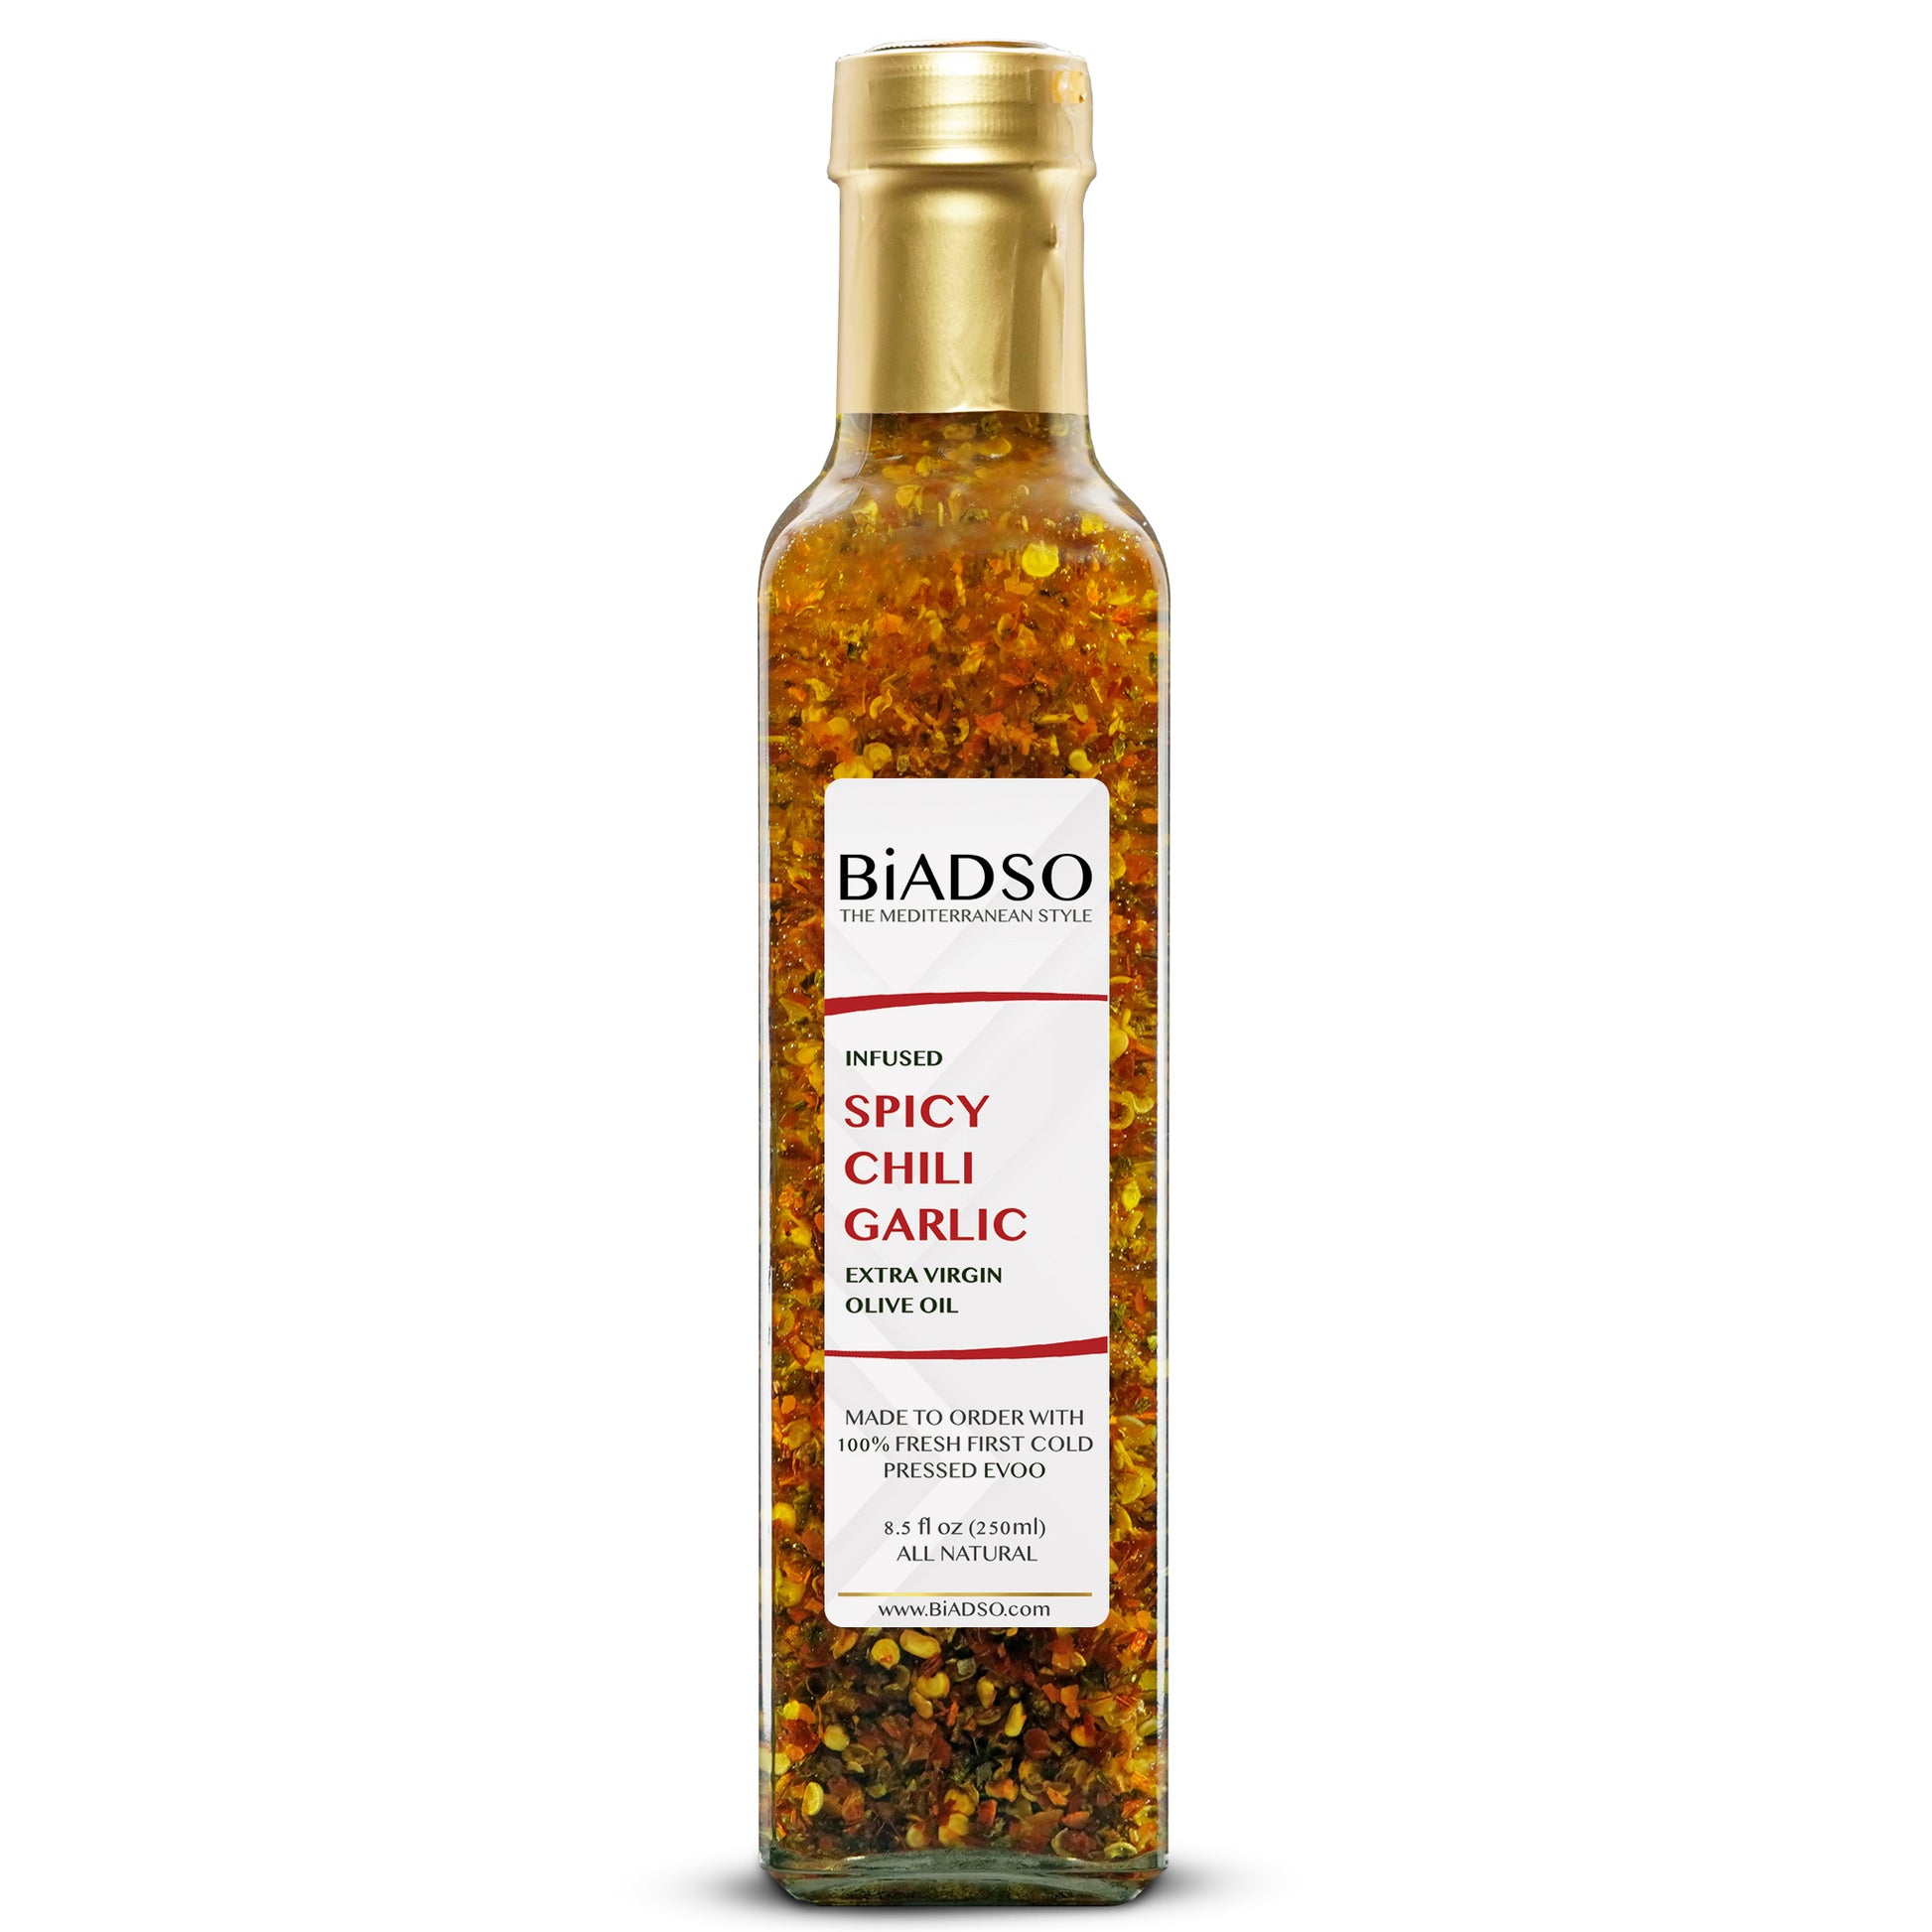 Spicy Chili Garlic Infused Extra Virgin Olive Oil BiADSO Mediterranean Oils and Vinegars